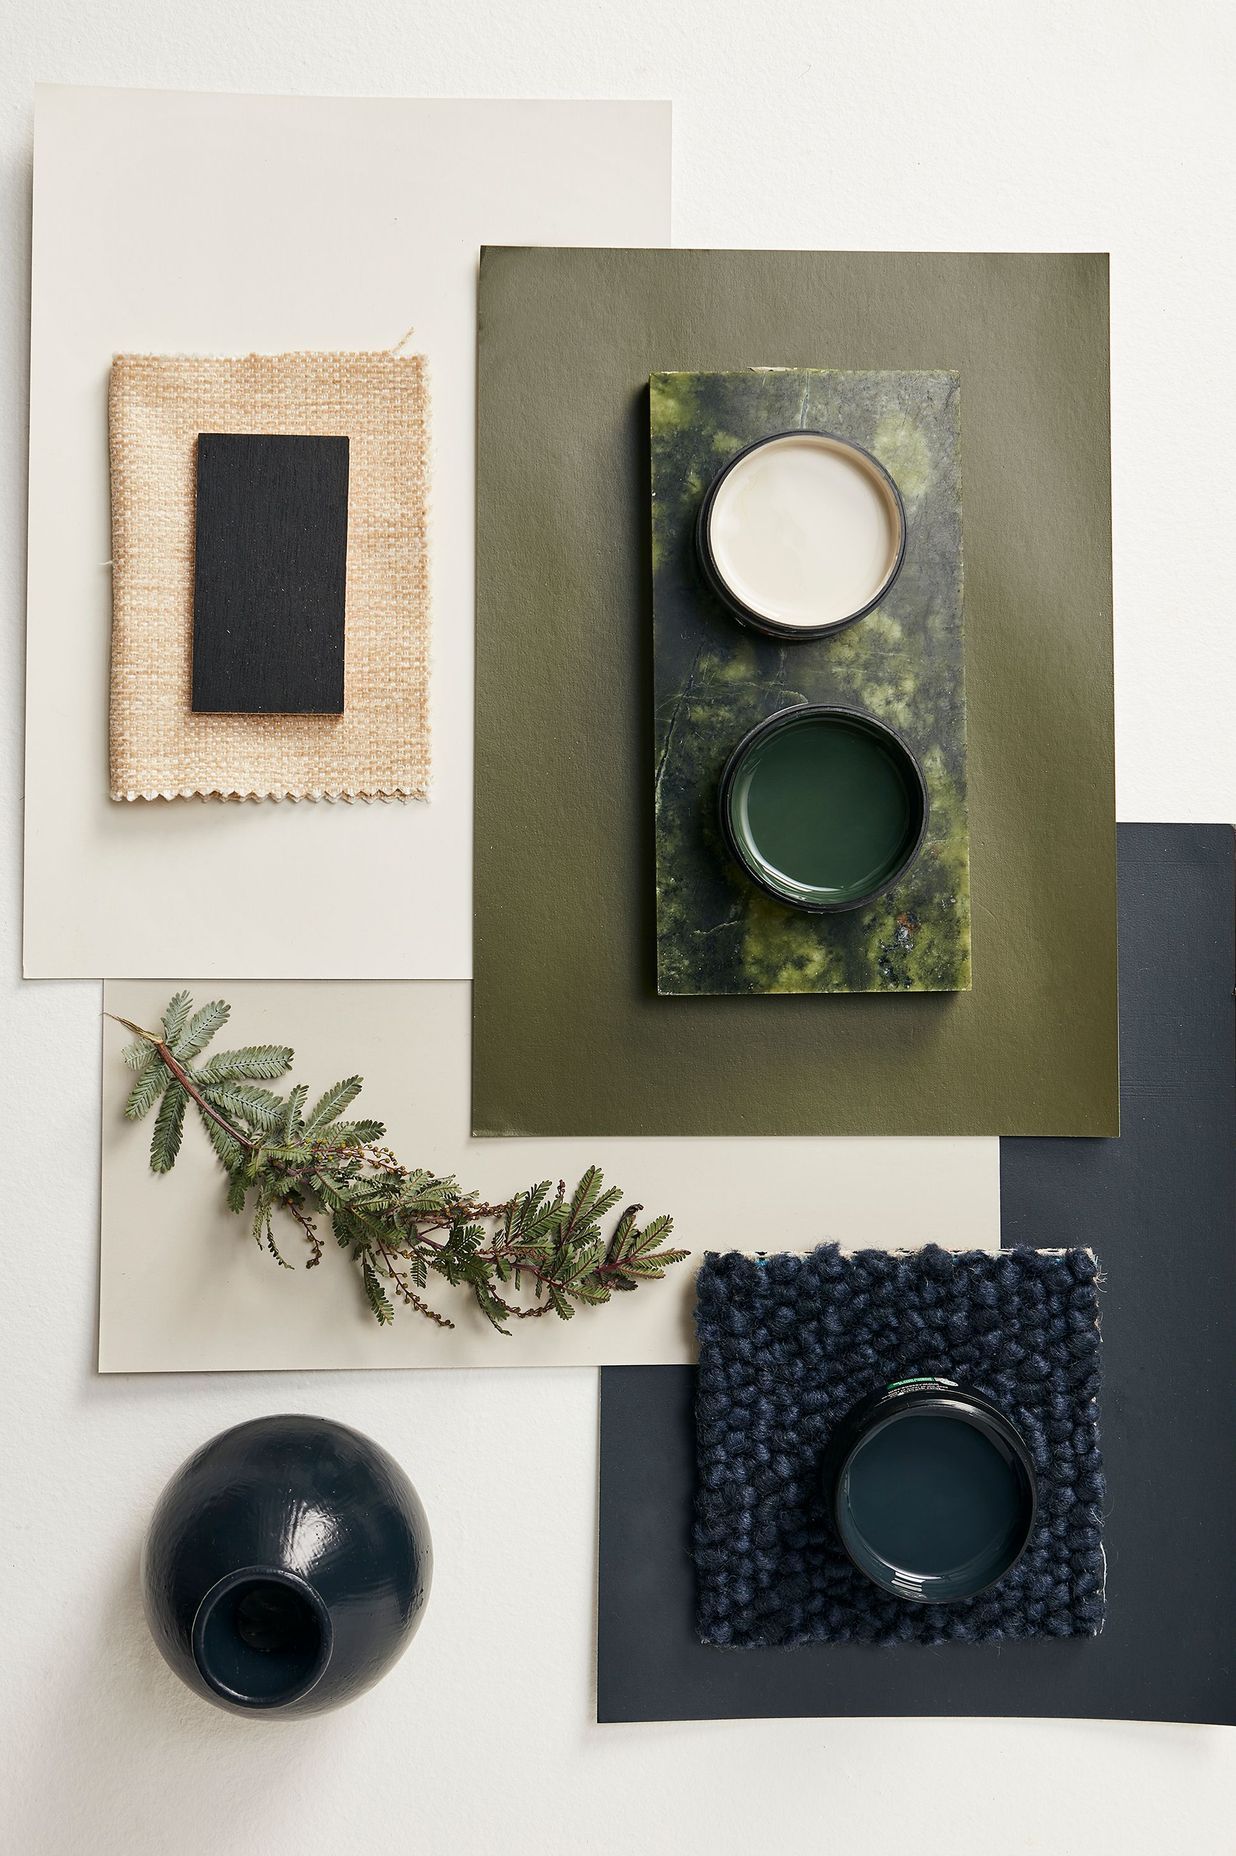 Deep green sit in harmony within a rich, natural palette.